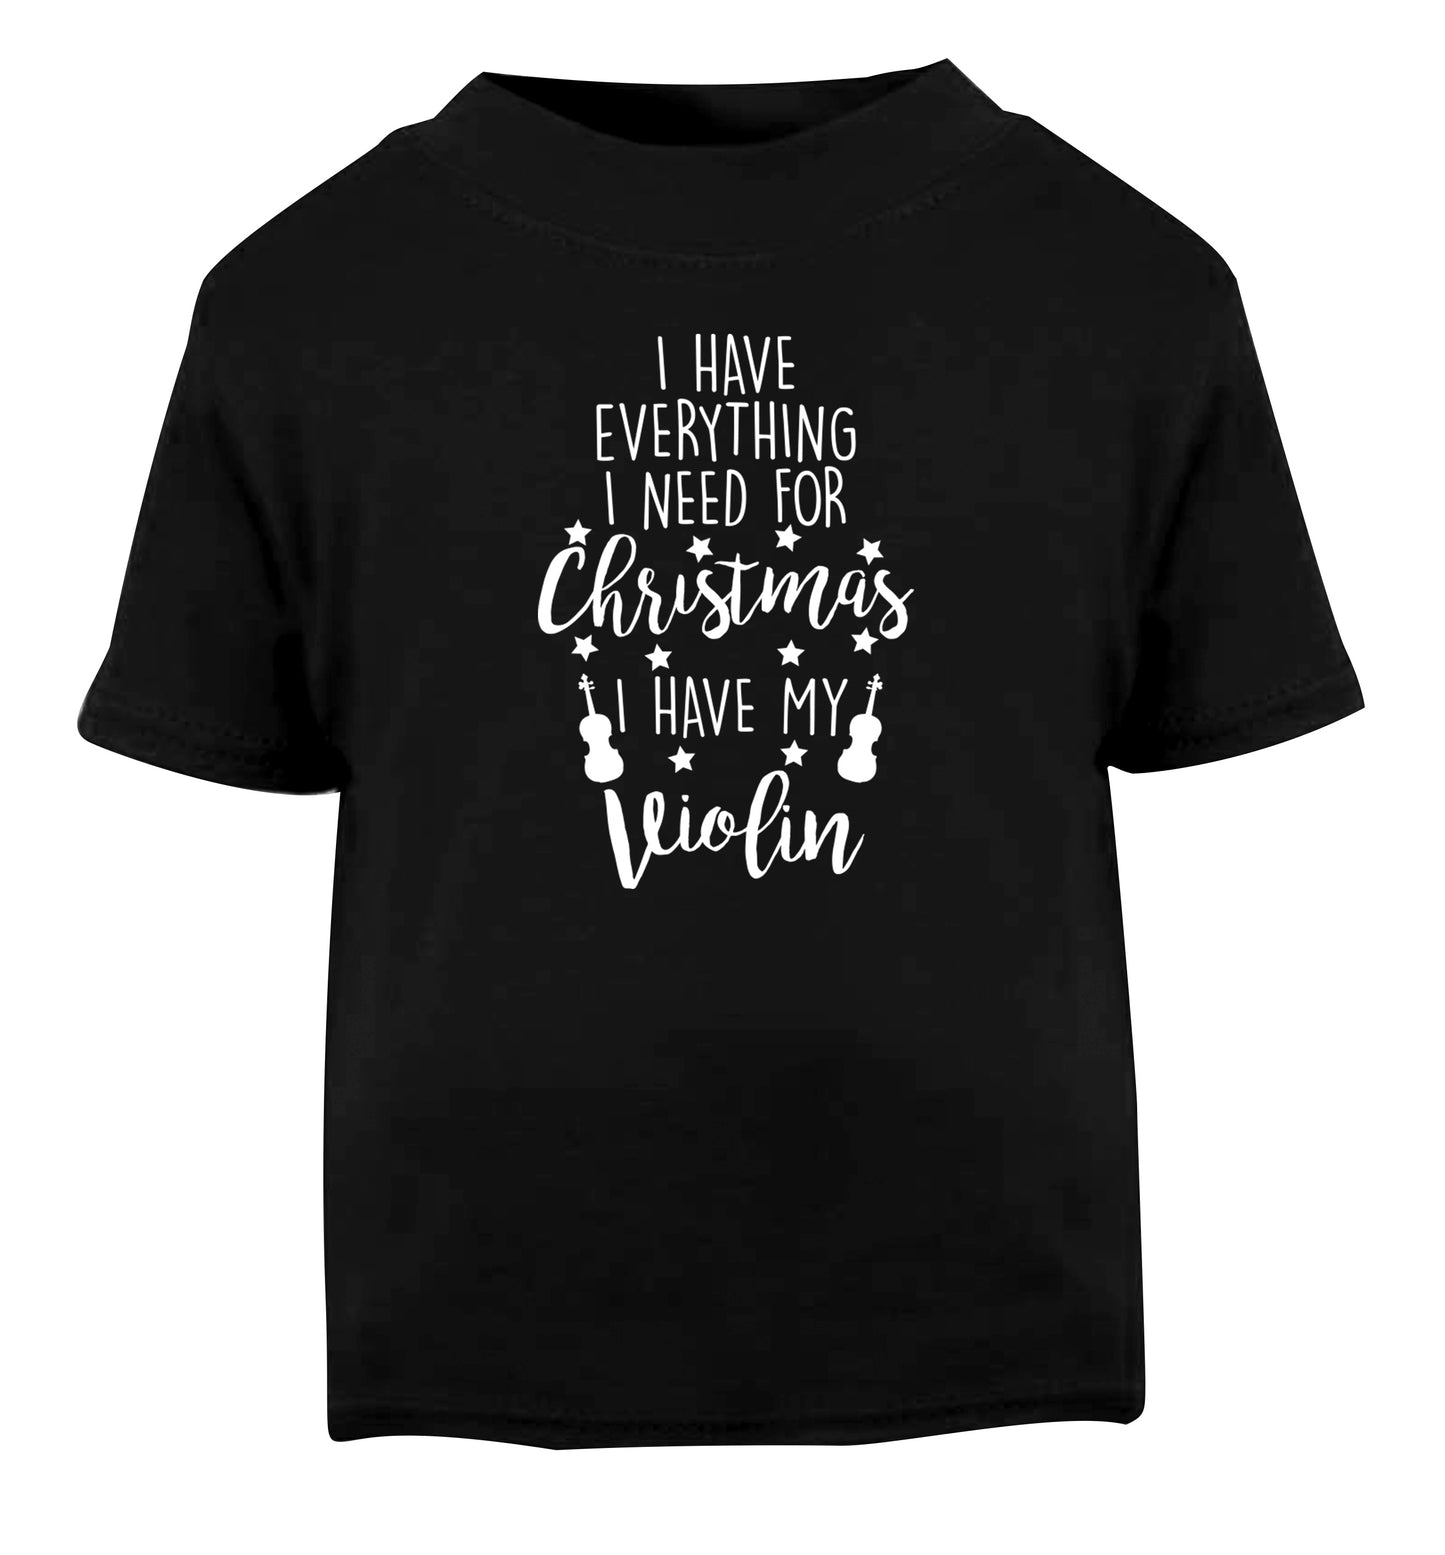 I have everything I need for Christmas I have my violin Black Baby Toddler Tshirt 2 years